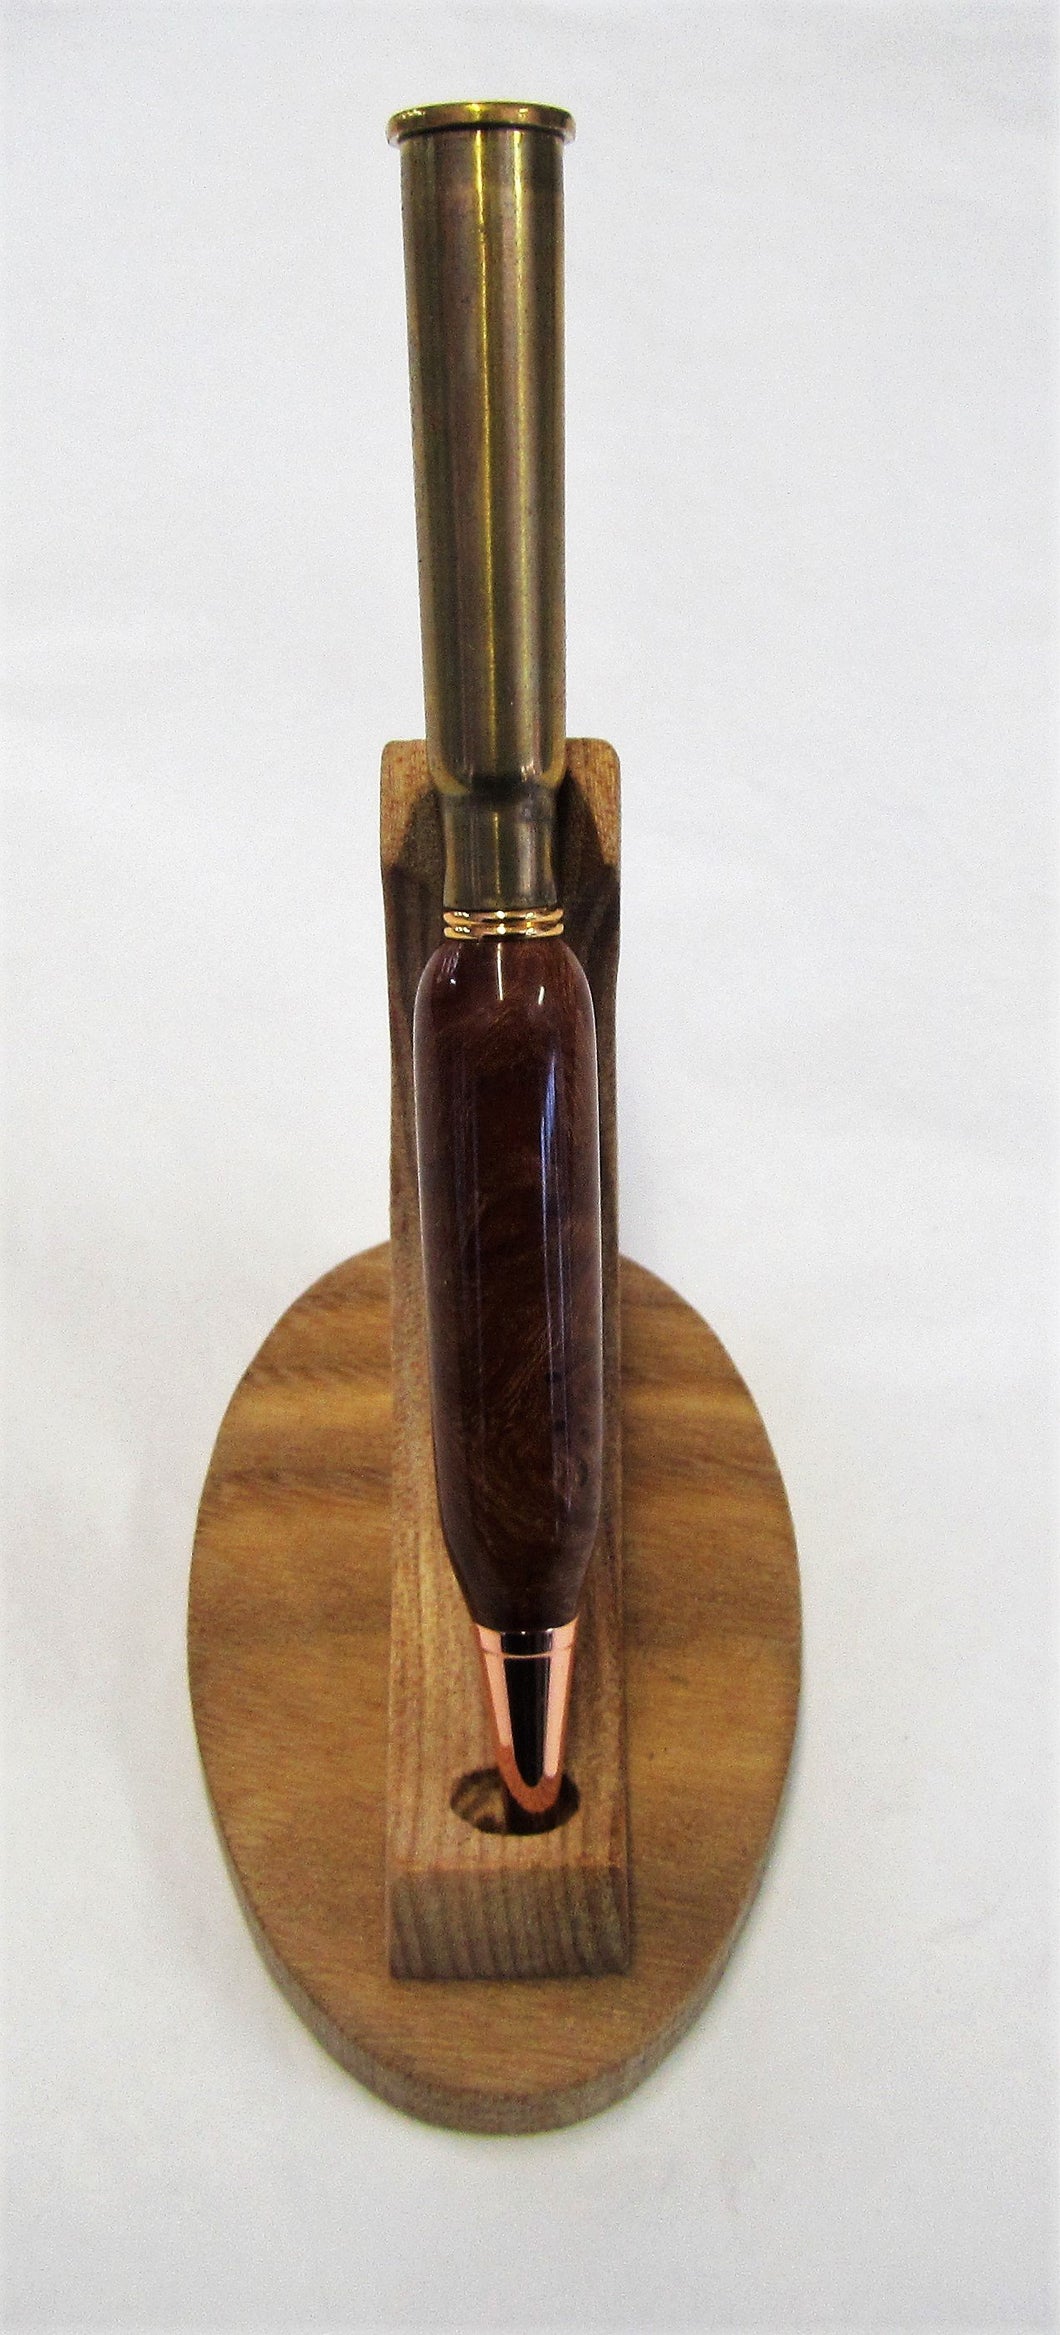 Handcrafted .303 bullet pen with various fittings and wood